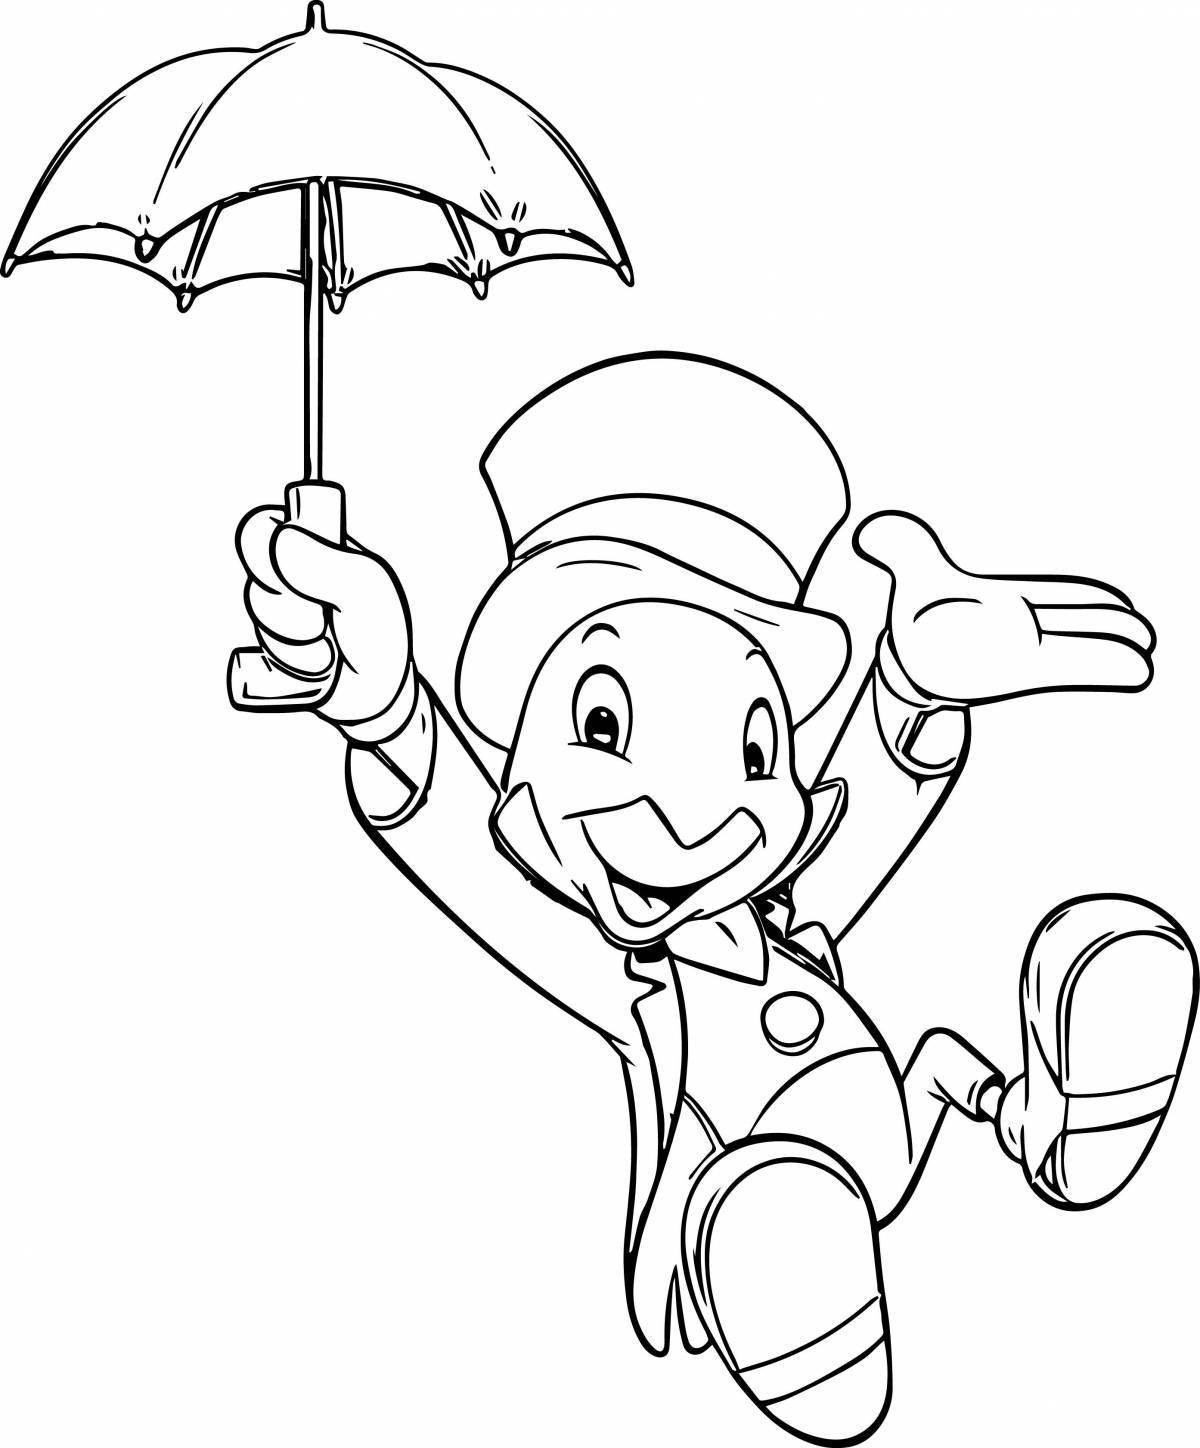 Colorful pinocchio coloring page